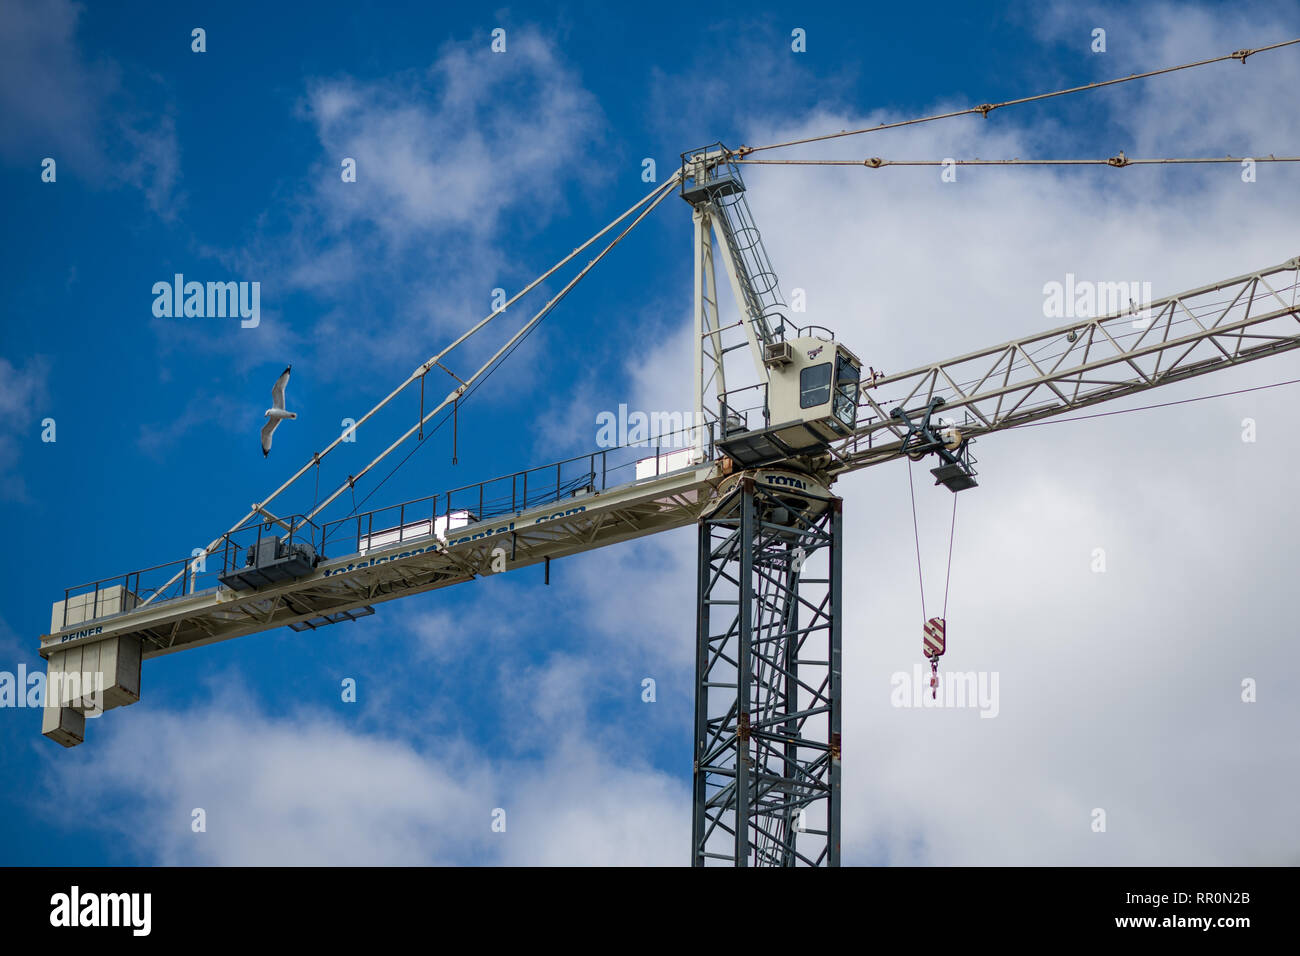 Construction crane against white and blue sky, with seagull / bird, near the Brant St Pier in Burlington, Ontario, Canada. Stock Photo